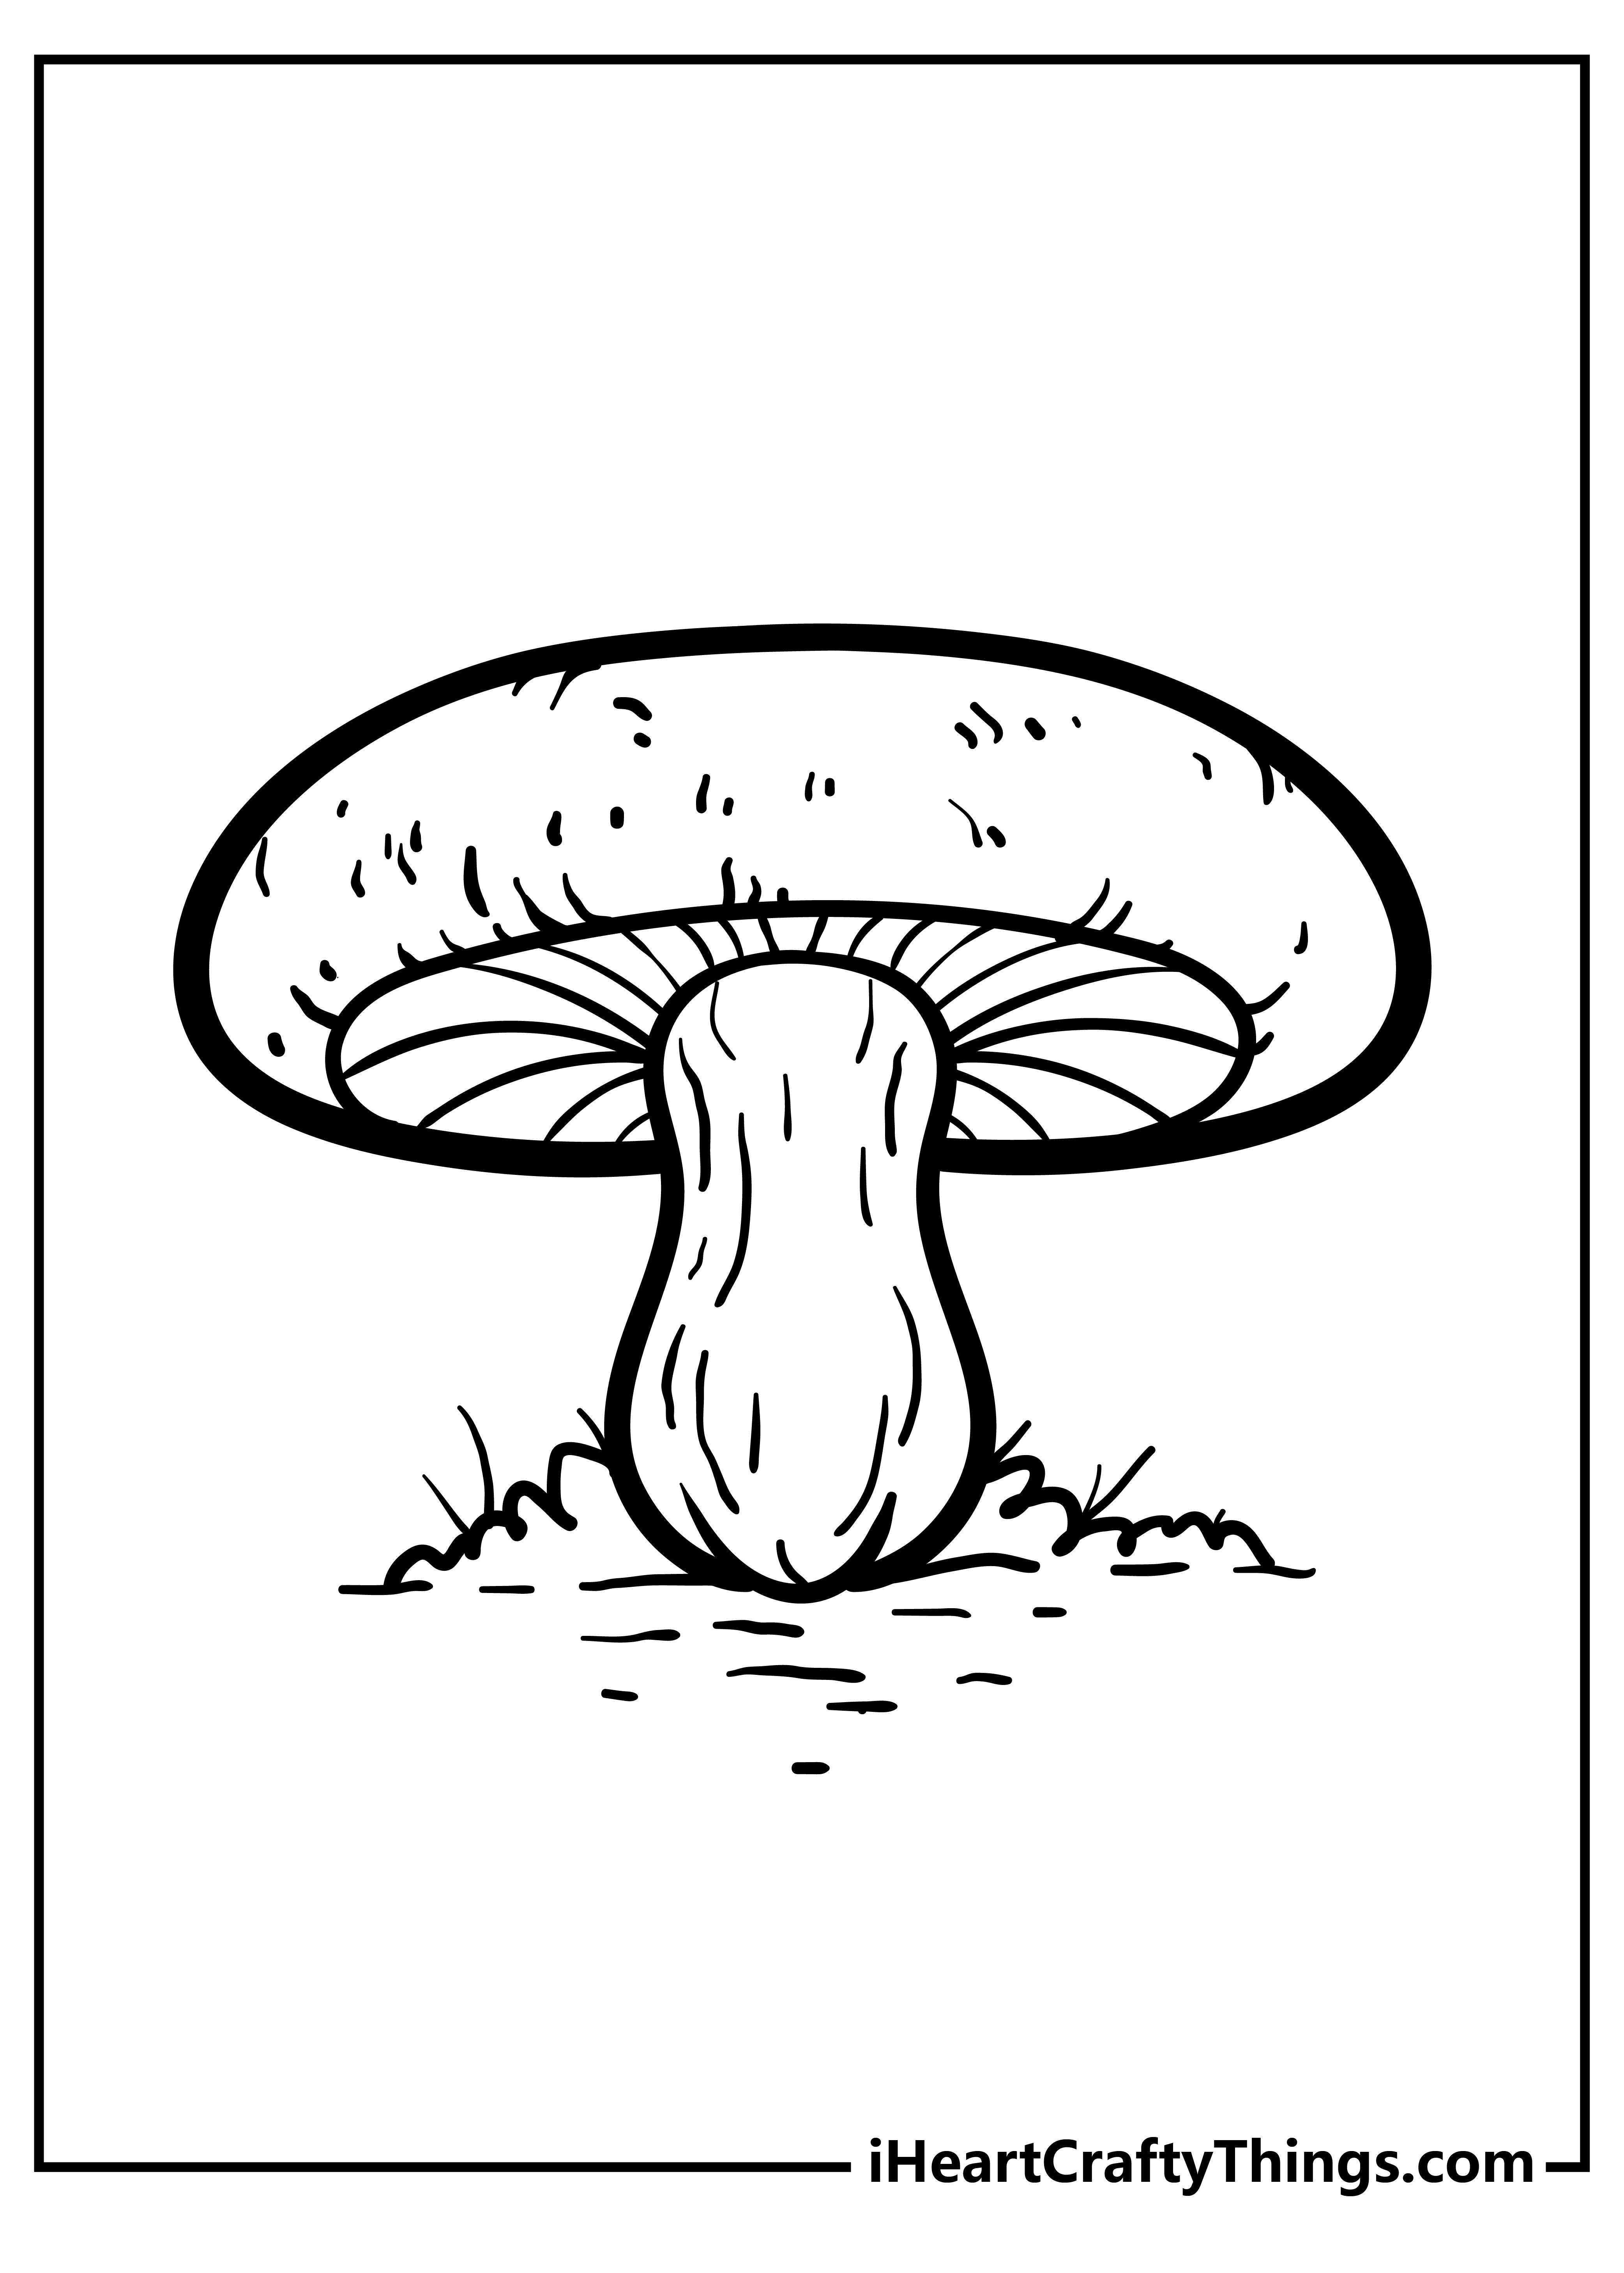 Mushroom Coloring Pages for kids free download